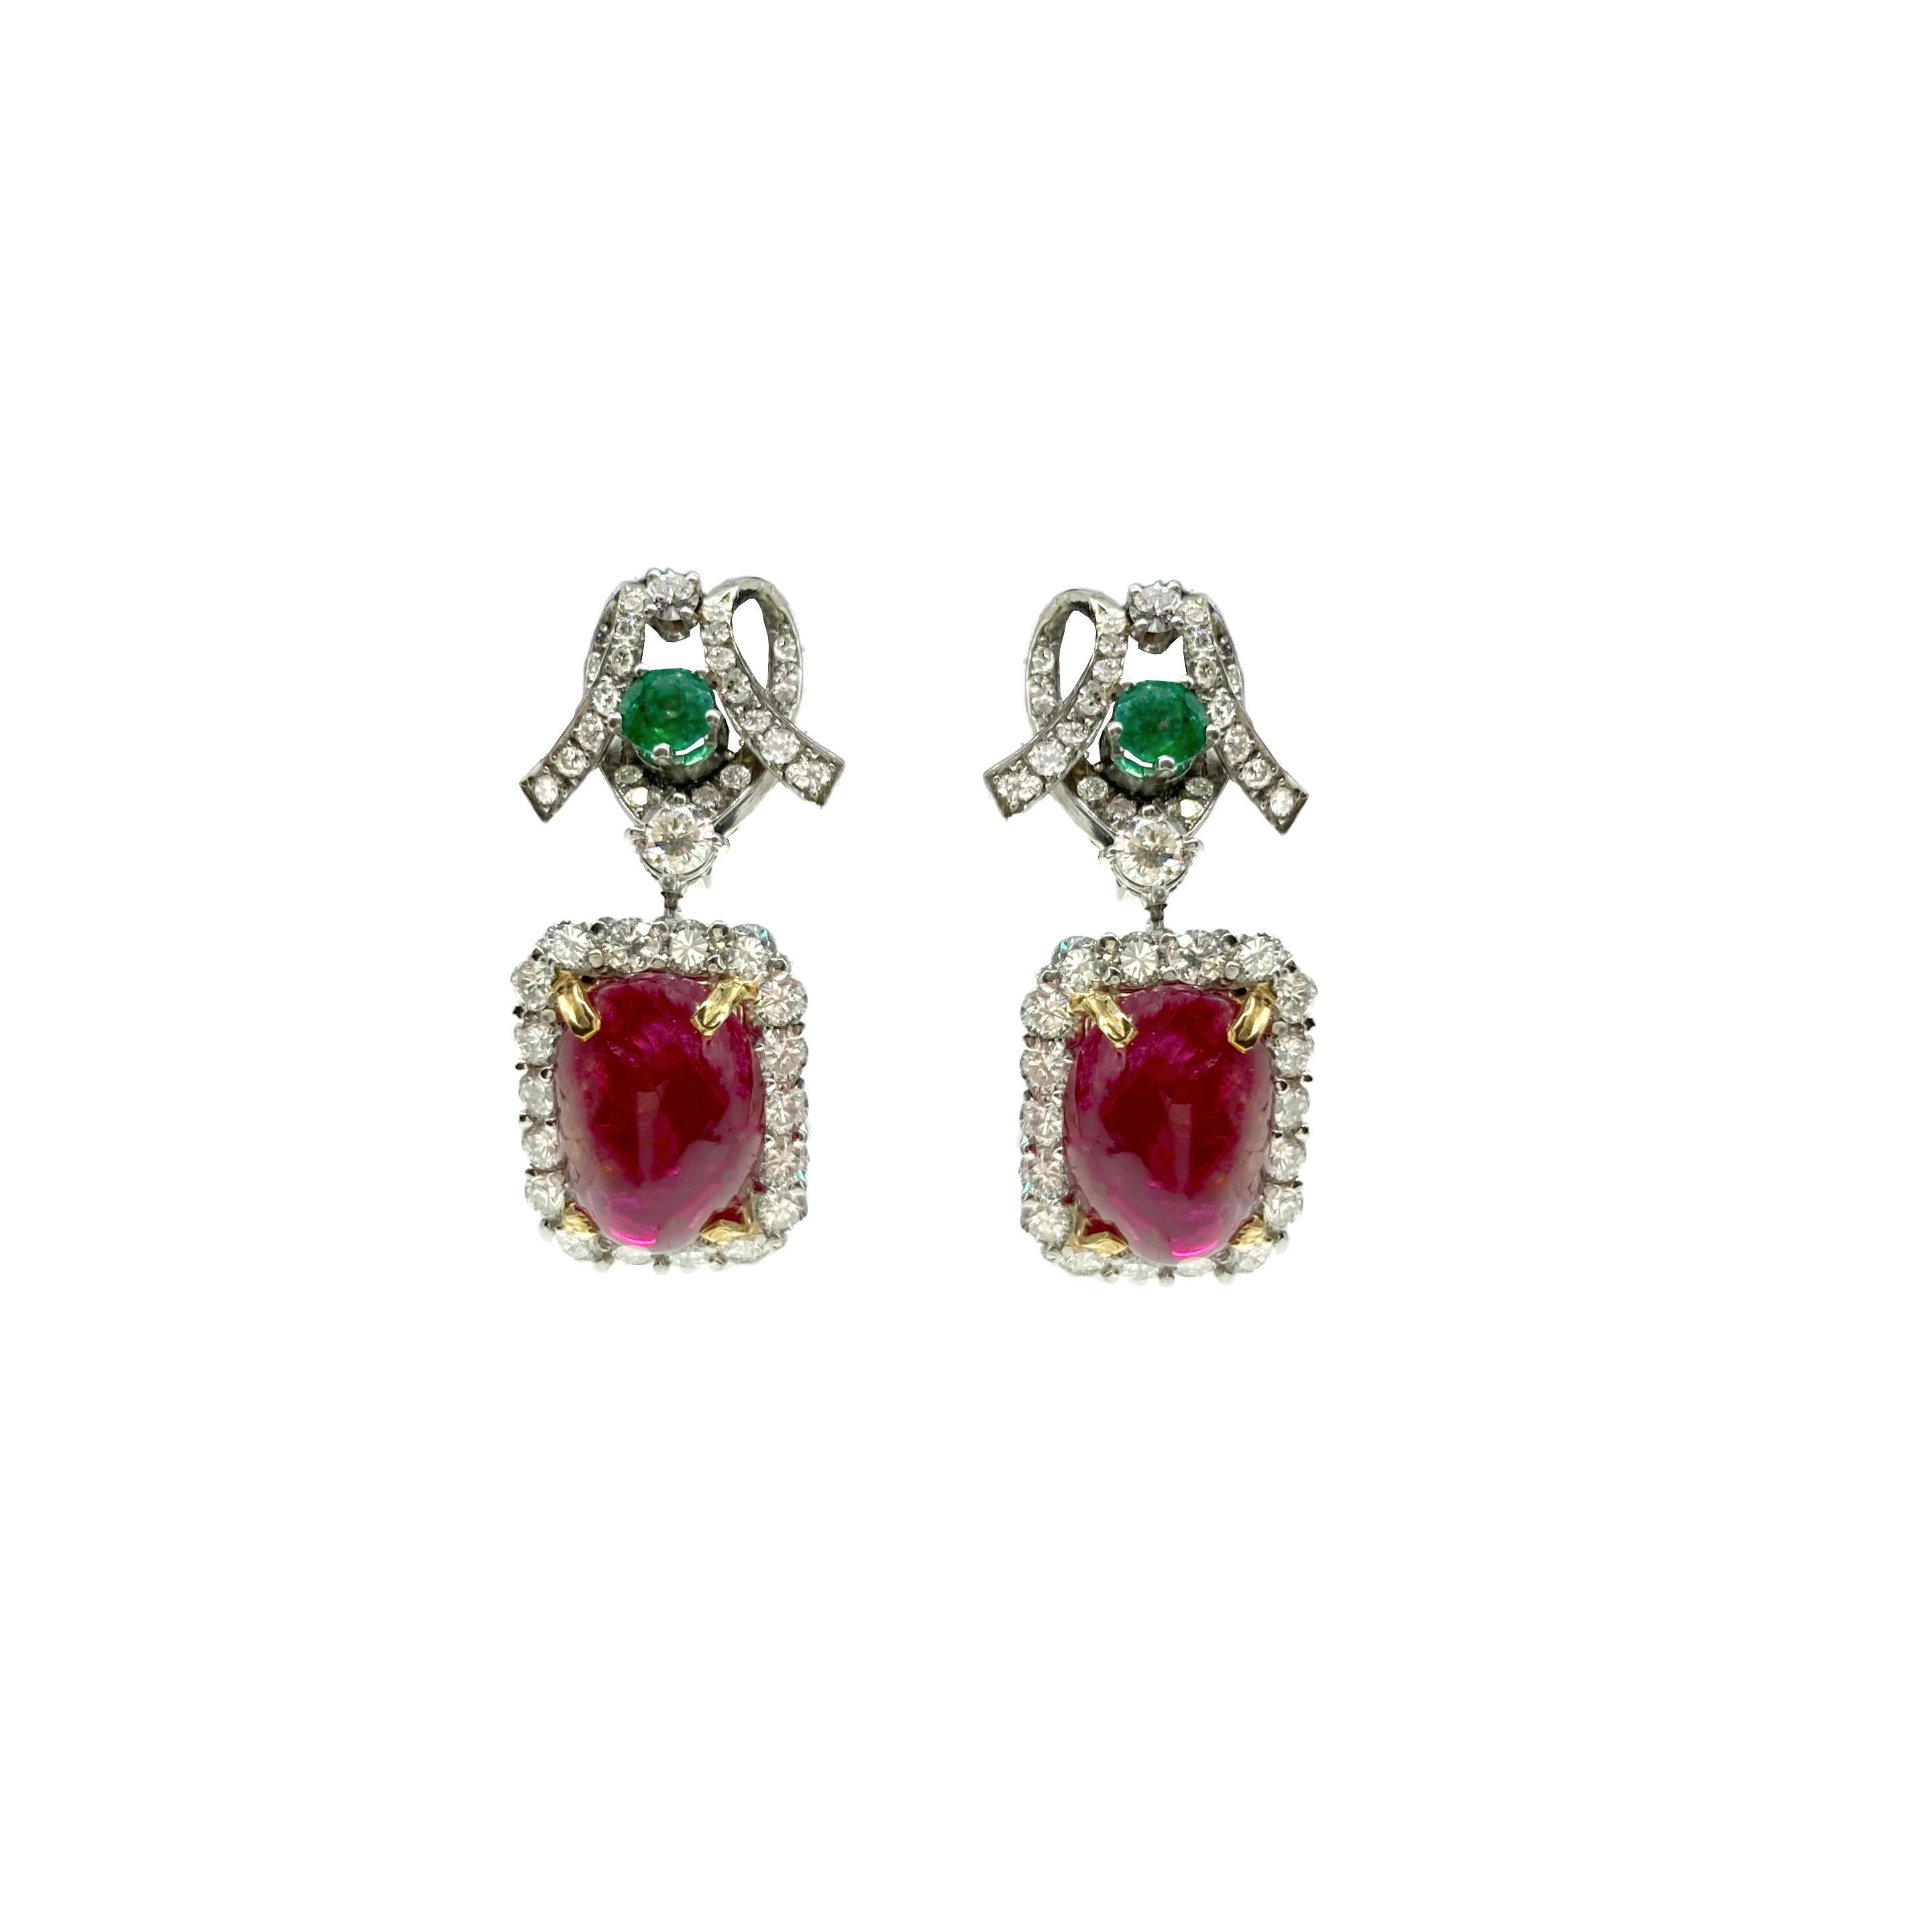 Mixed Cut Cabochon Spinel, Emerald, and Diamond White Gold Drop Earrings